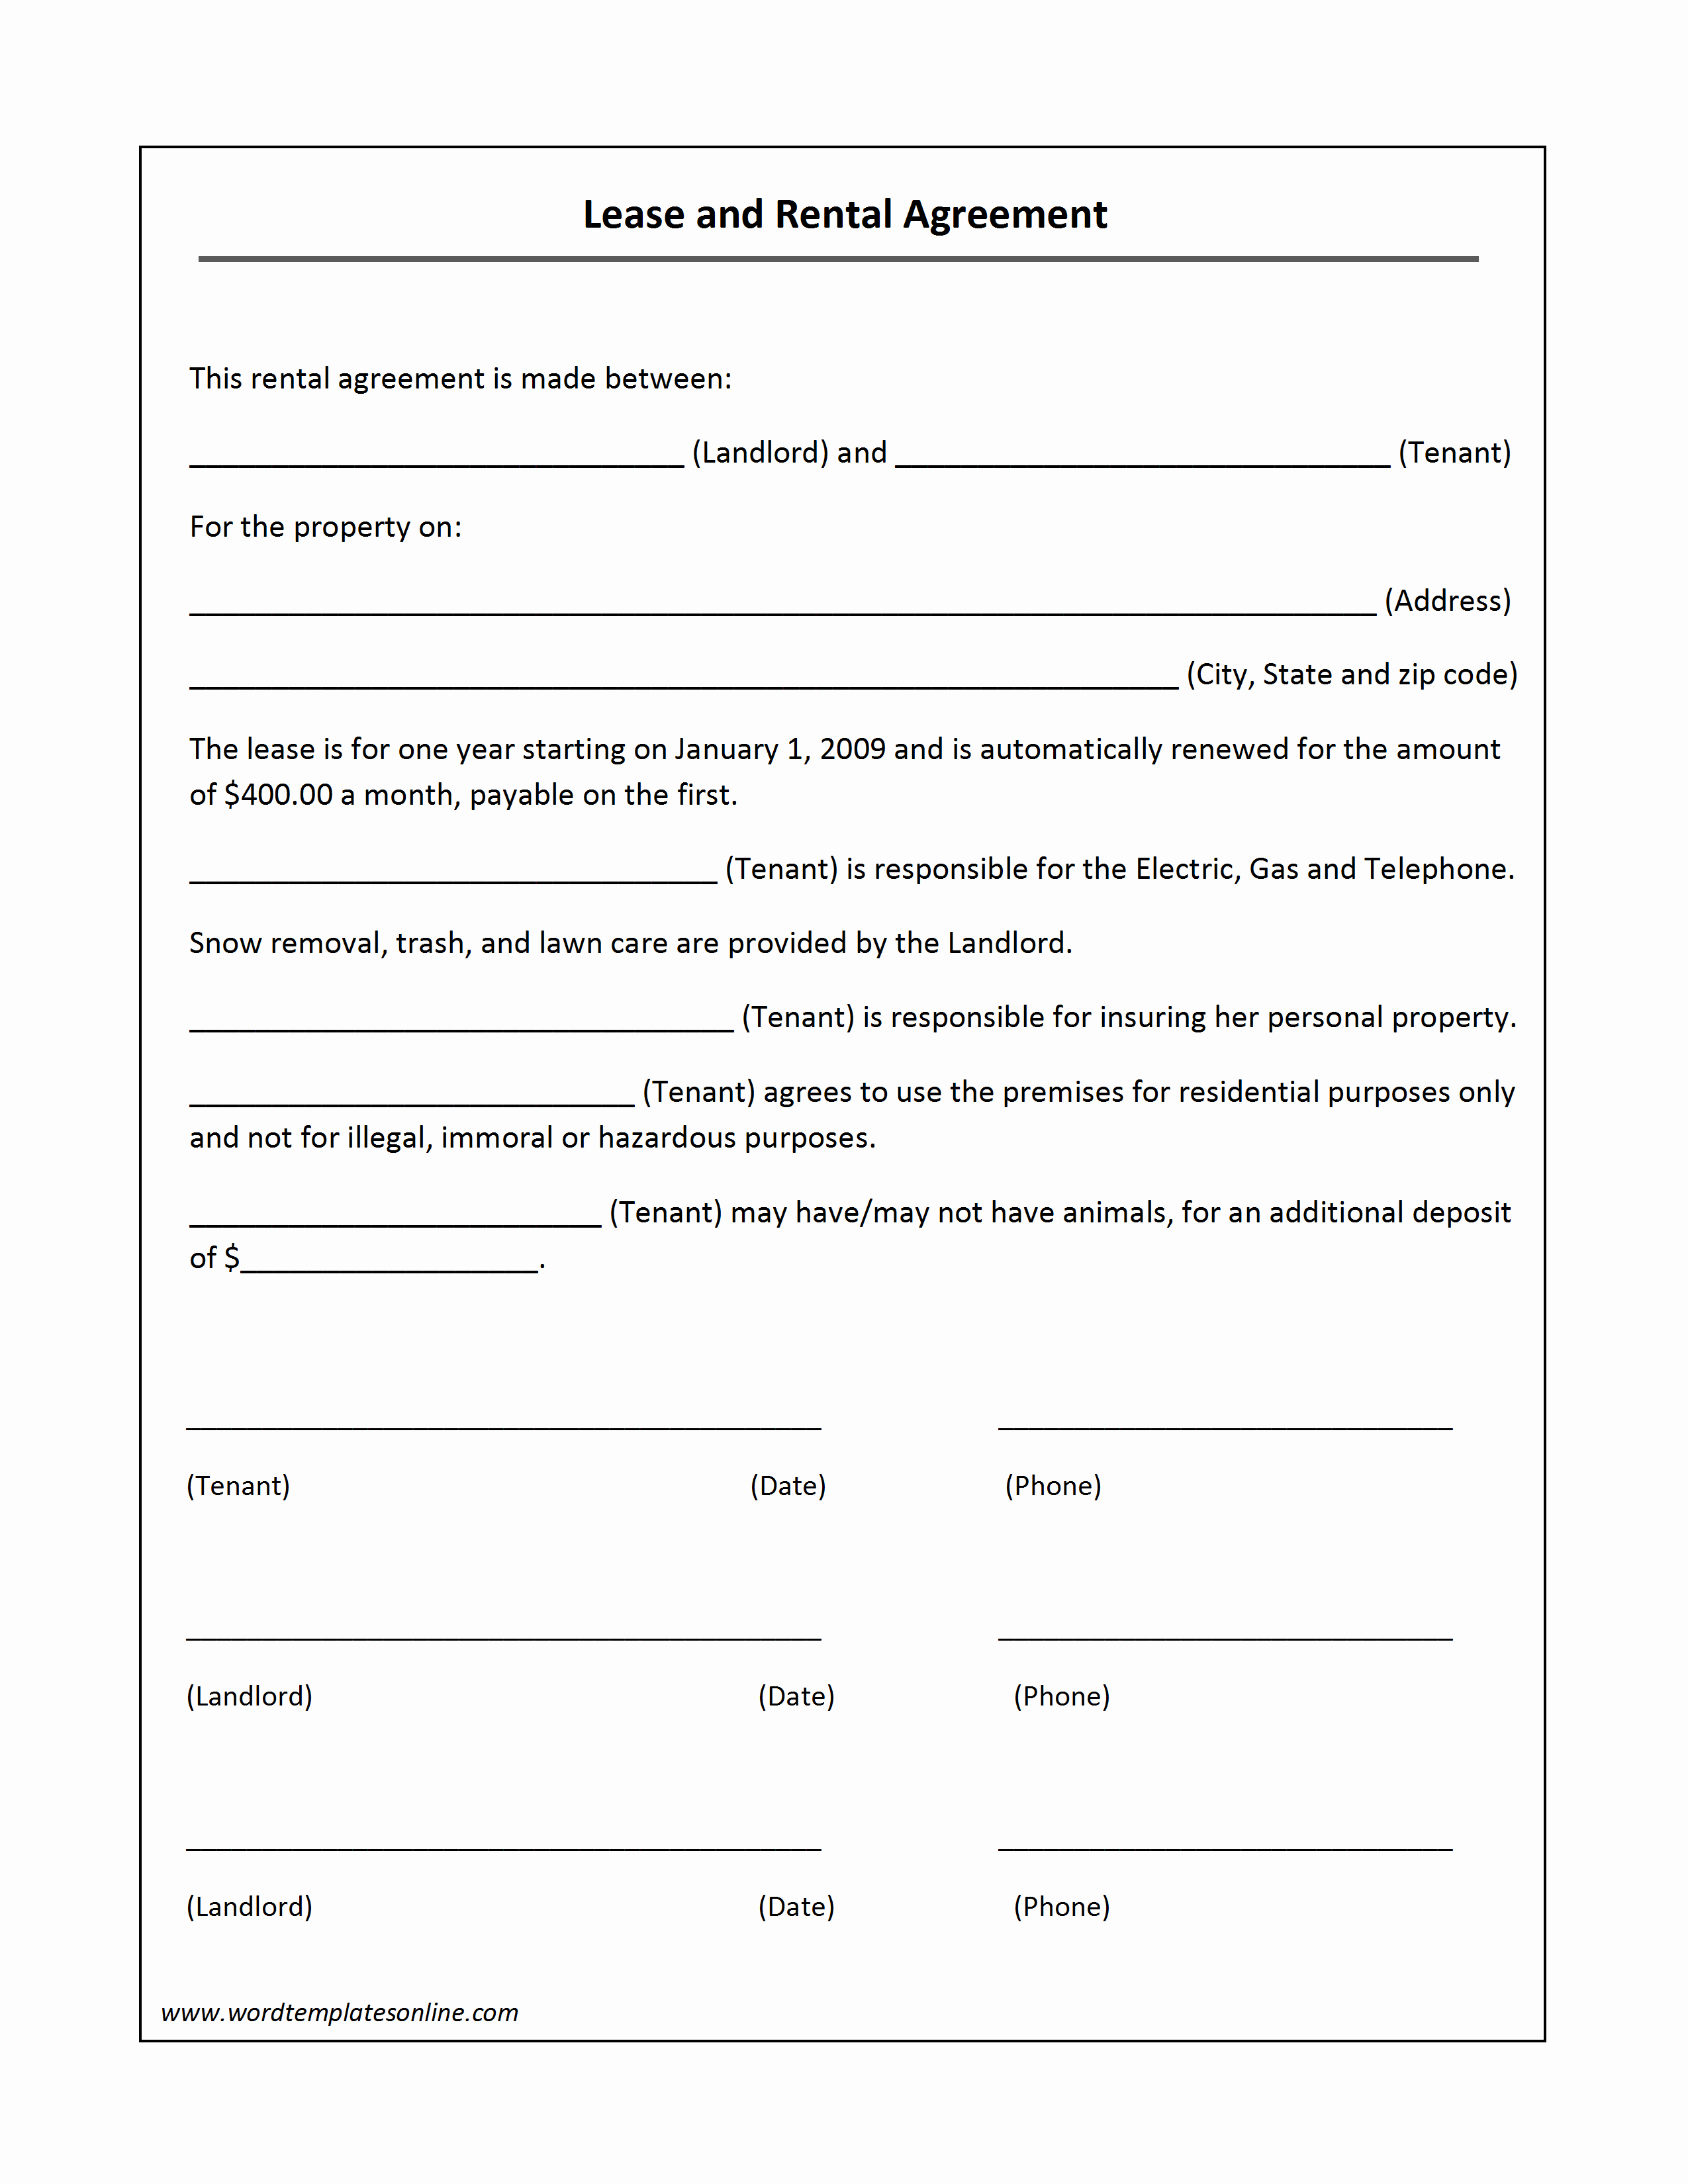 Basic Lease Agreement Template Inspirational Lease Agreement Template